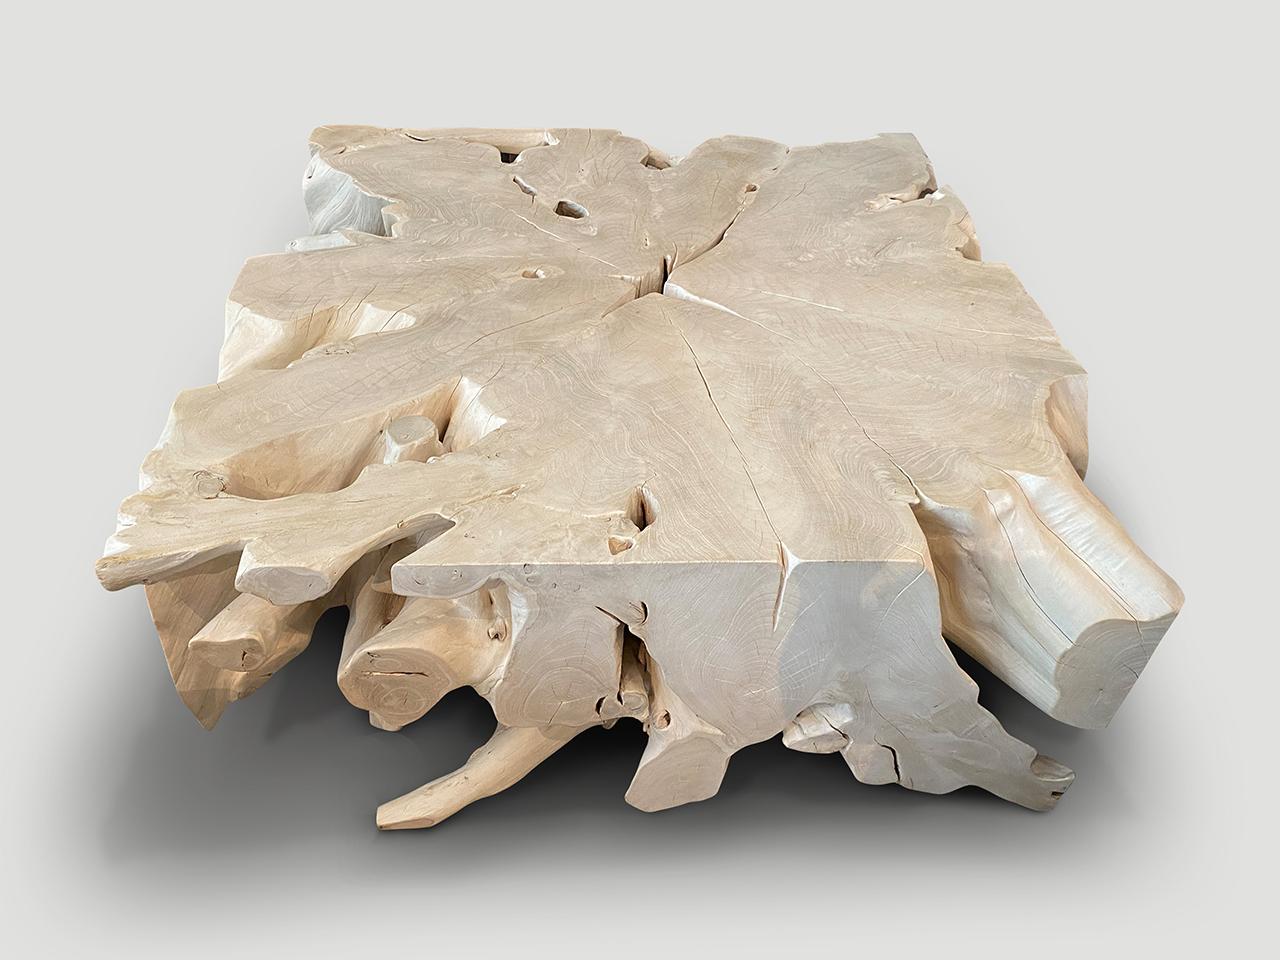 Beautiful bleached teak root coffee table or if turned on the side a console at 41? wide x 17” deep x 40” high. Hand cut, shaped and sanded from a single reclaimed teak root. Impressive scale and both sculptural and usable. Also available charred or